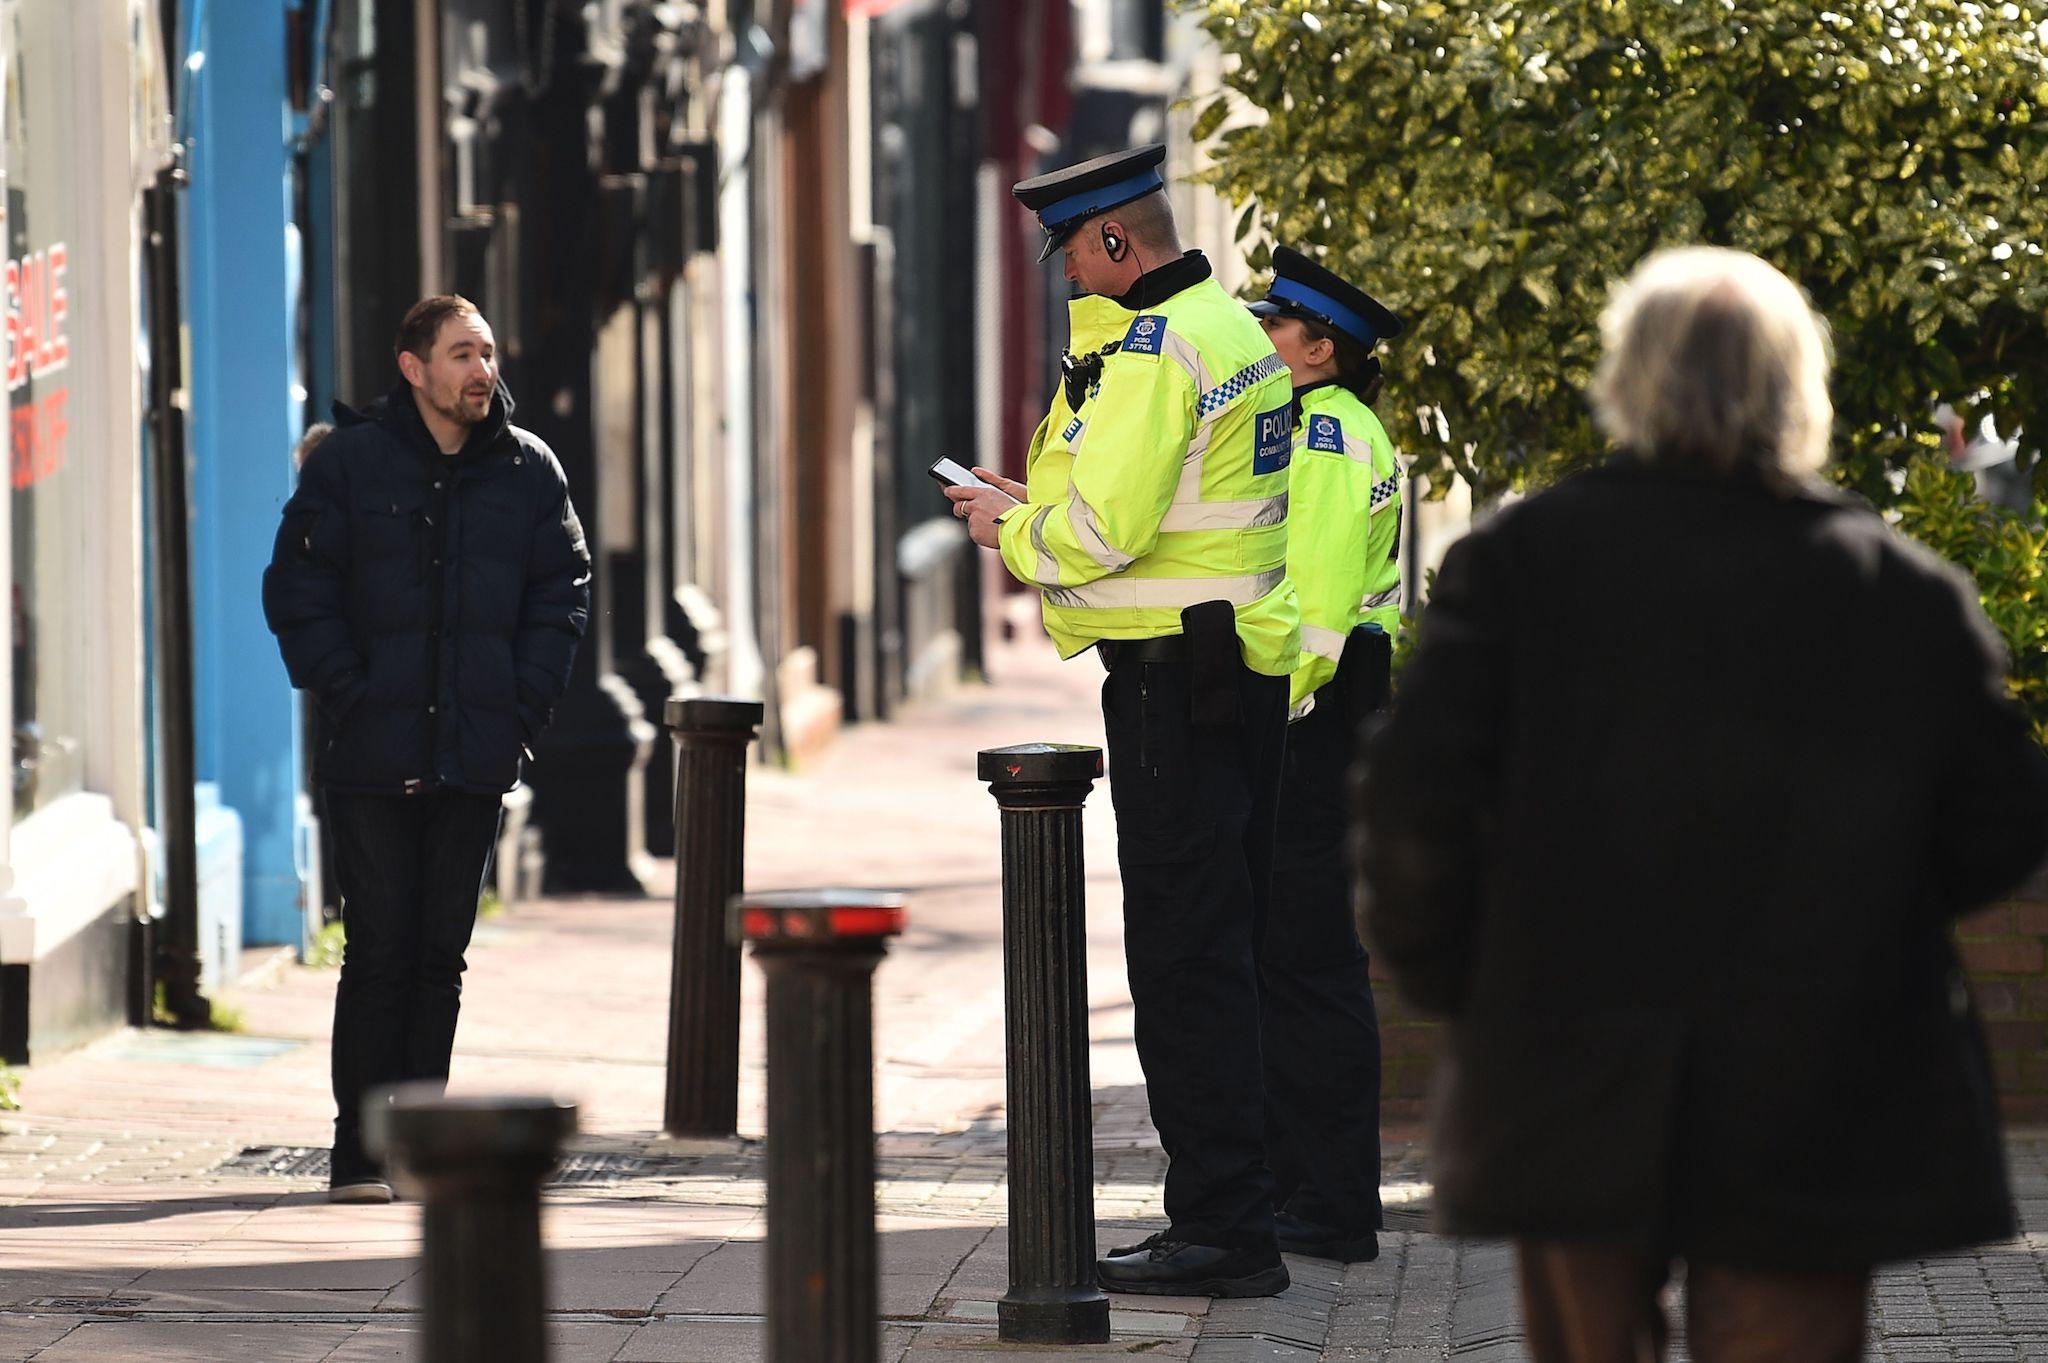 Police community support officers talk to a man on a street in Brighton shortly after the lockdown